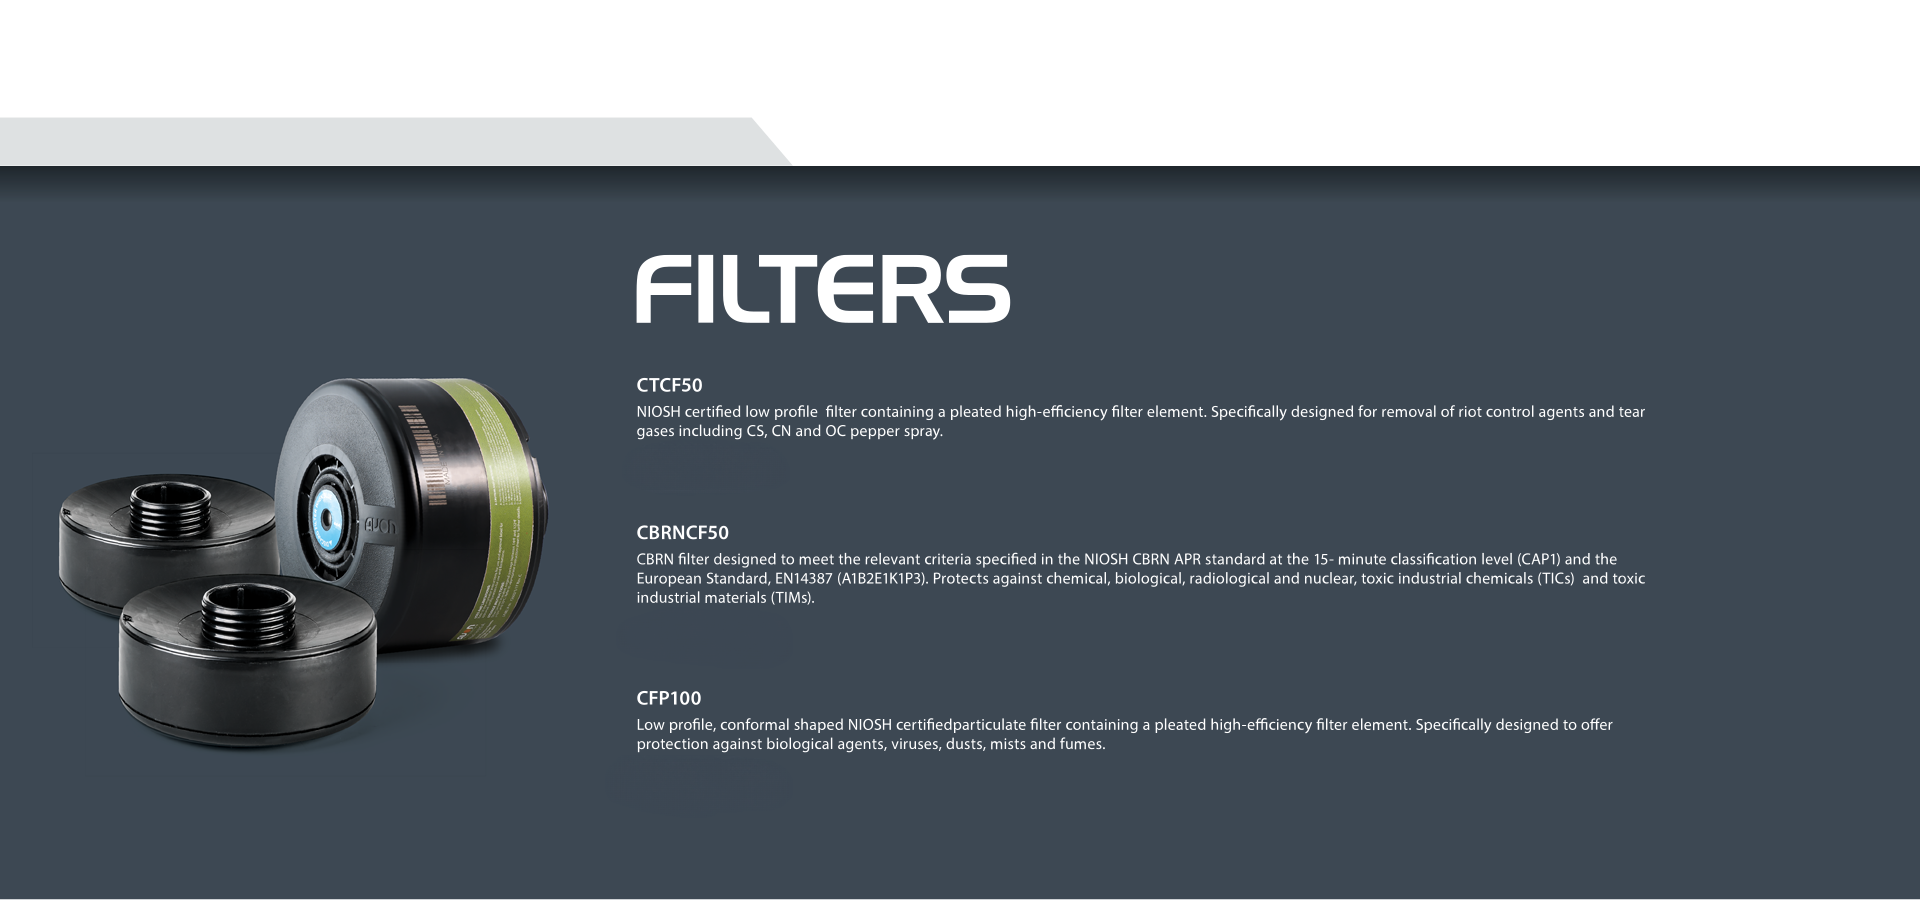 Filter Features2c